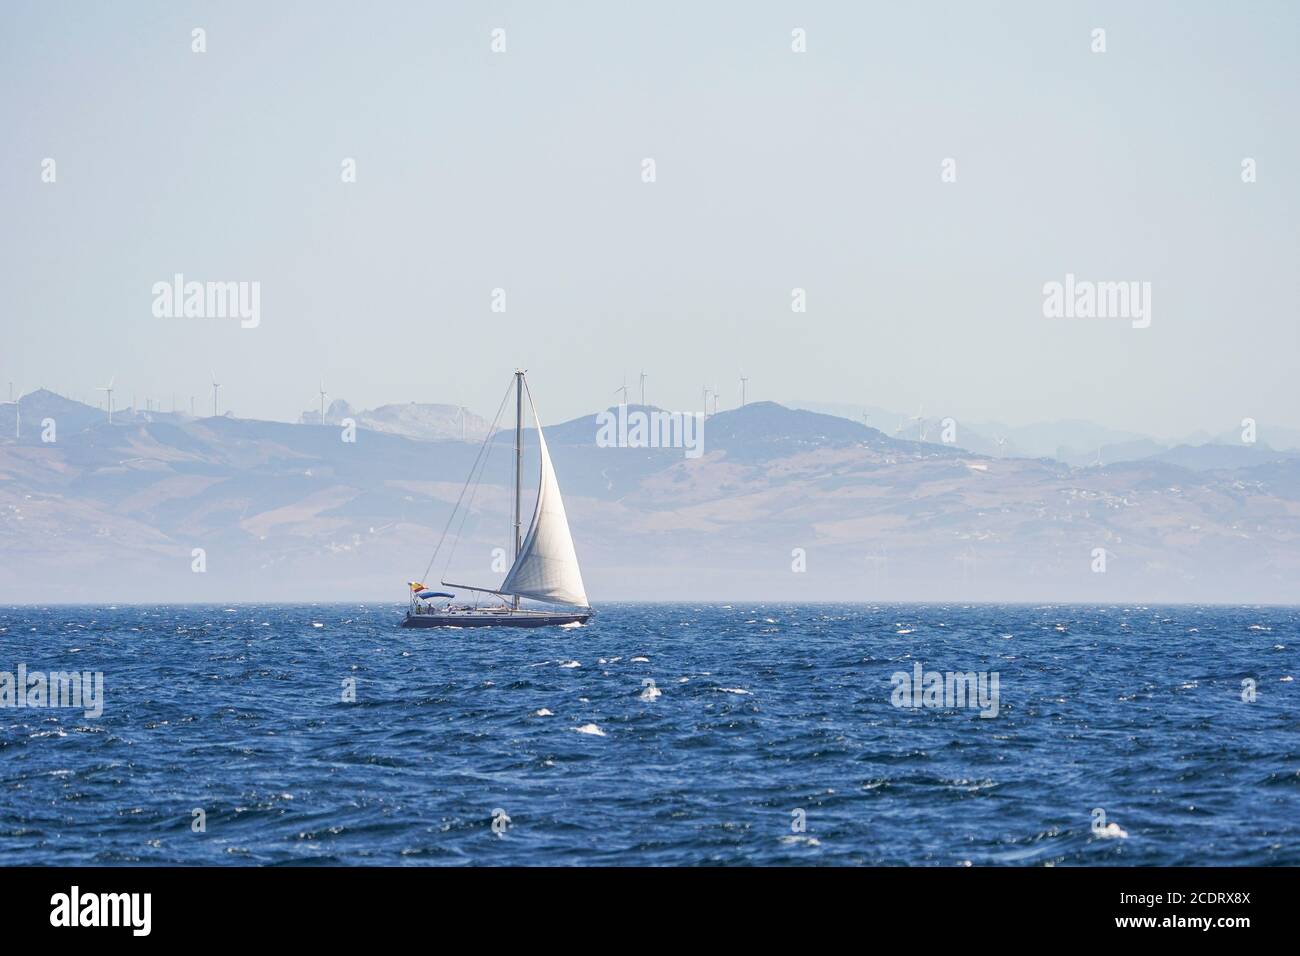 Sailboat on open sea, at strait of Gibraltar, Morocco in background, Spain. Stock Photo